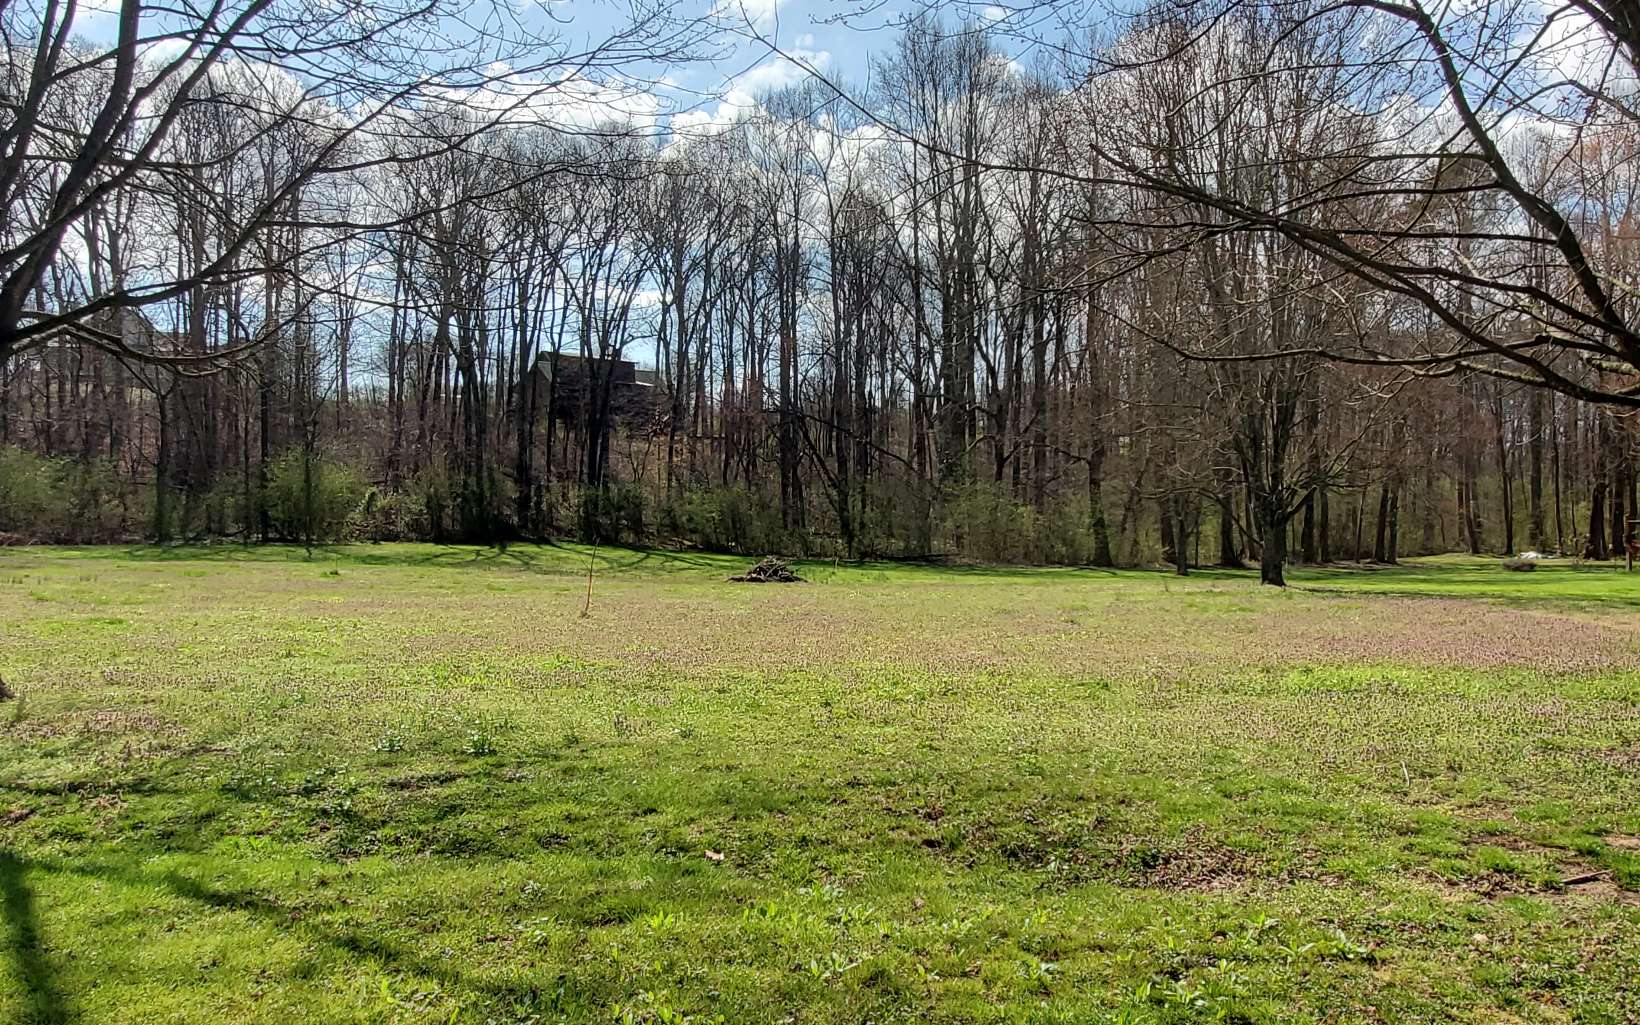 Come build your dream home on this flat cleared lot in a River accessed subdivision. The lot has already been perked so it's ready to go. In a subdivision with all paved roads and 1/4 mile off of Hwy 52E. The subdivision has a boardwalk to a common area right on the Cartecay River where you can fish and have a cookout by the water. It's within a short distance to many of the Apple Orchards, Vineyards, the new hard cider distillery and much more. It's a straight shot into town with all paved roads. It's hard to find a cleared, flat lot where you can start building without any lot prep work. Don't miss out!